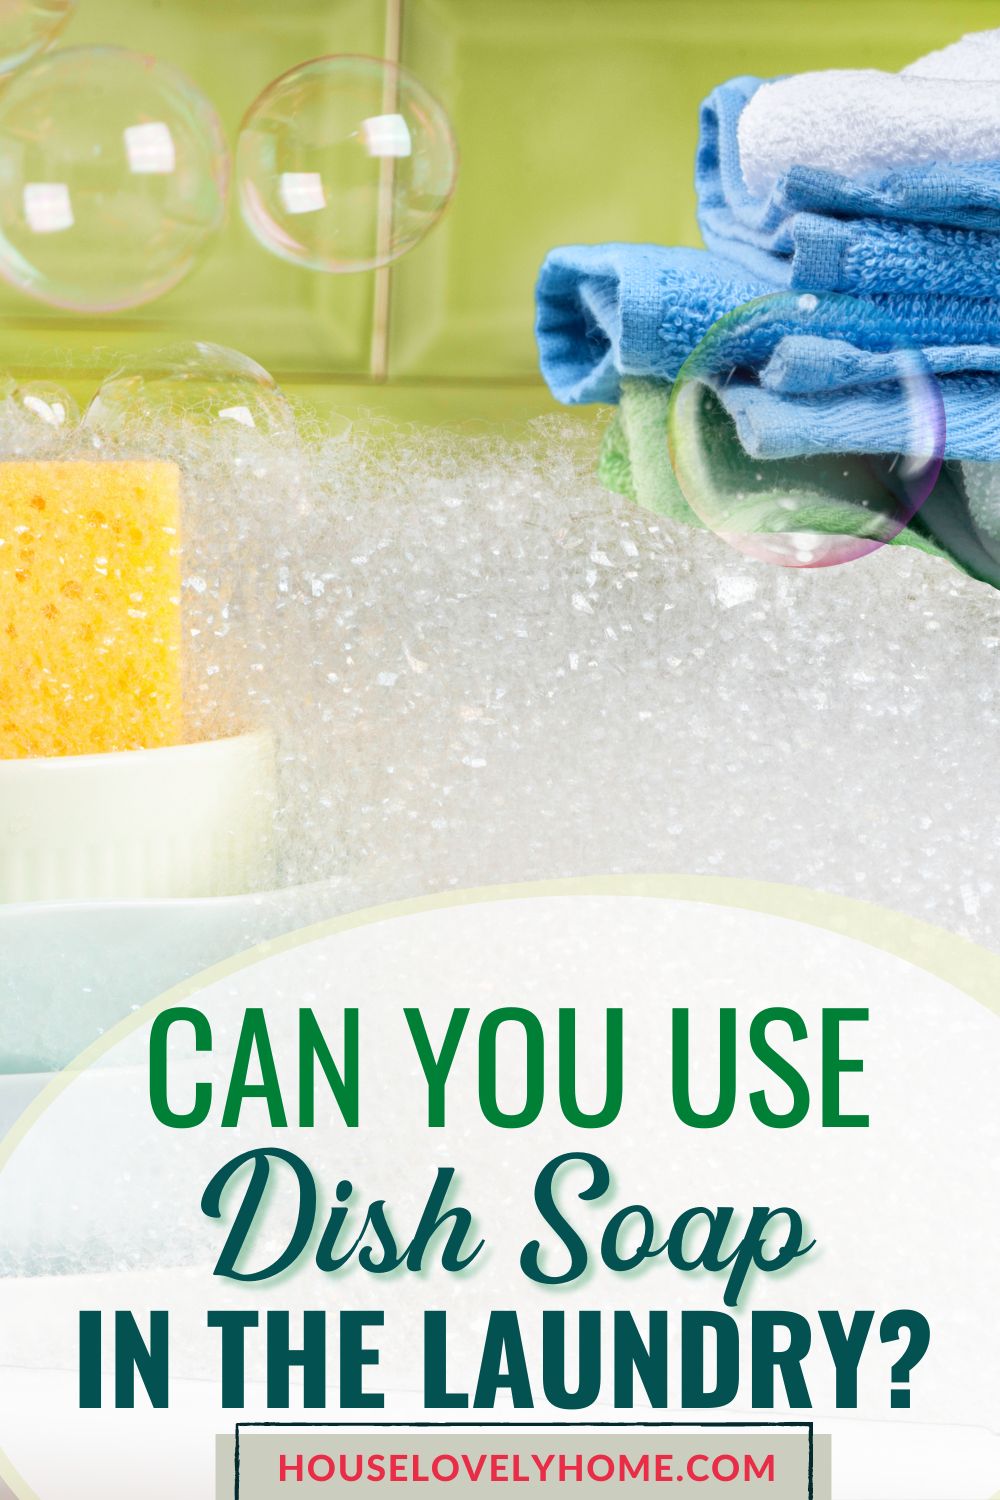 Image showing yellow sponge over white plates, with some laundry at the background with lather all over and a text overlay that reads Can You Use Dish Soap in the Laundry